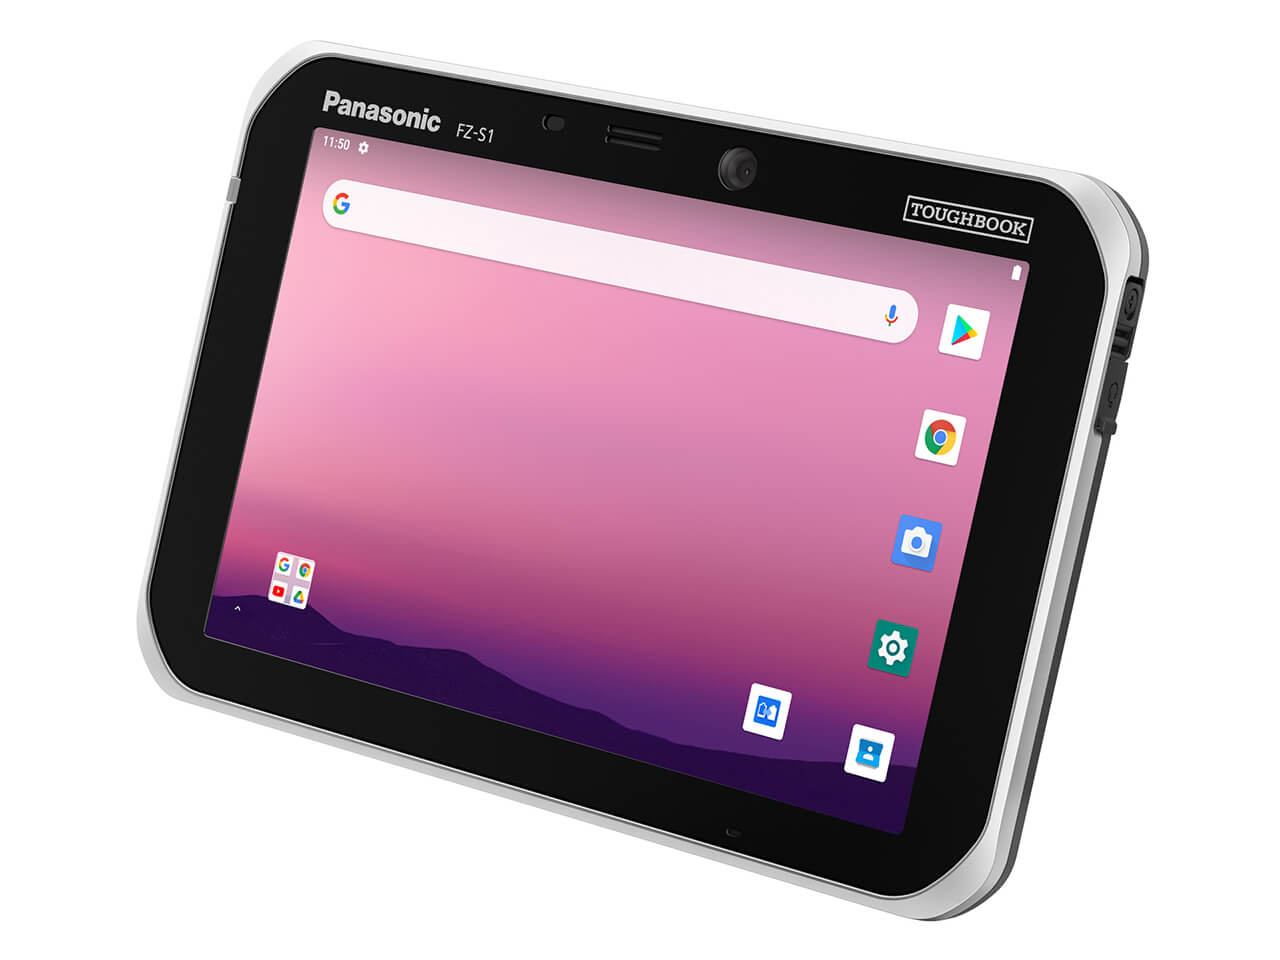 Toughpad FZ-S1 Tablet Perspective View